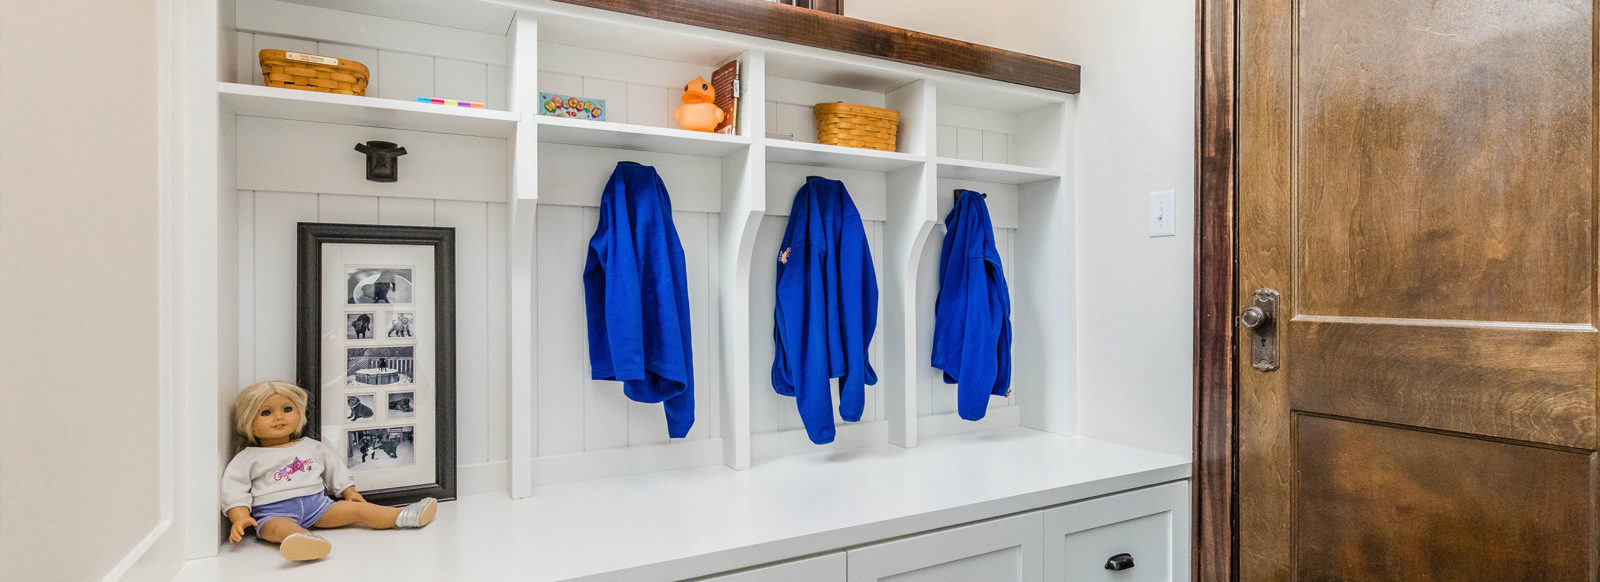 WHITE MUDROOM BUILTINS WITH BLUE JACKETS ON COAT HOOKS